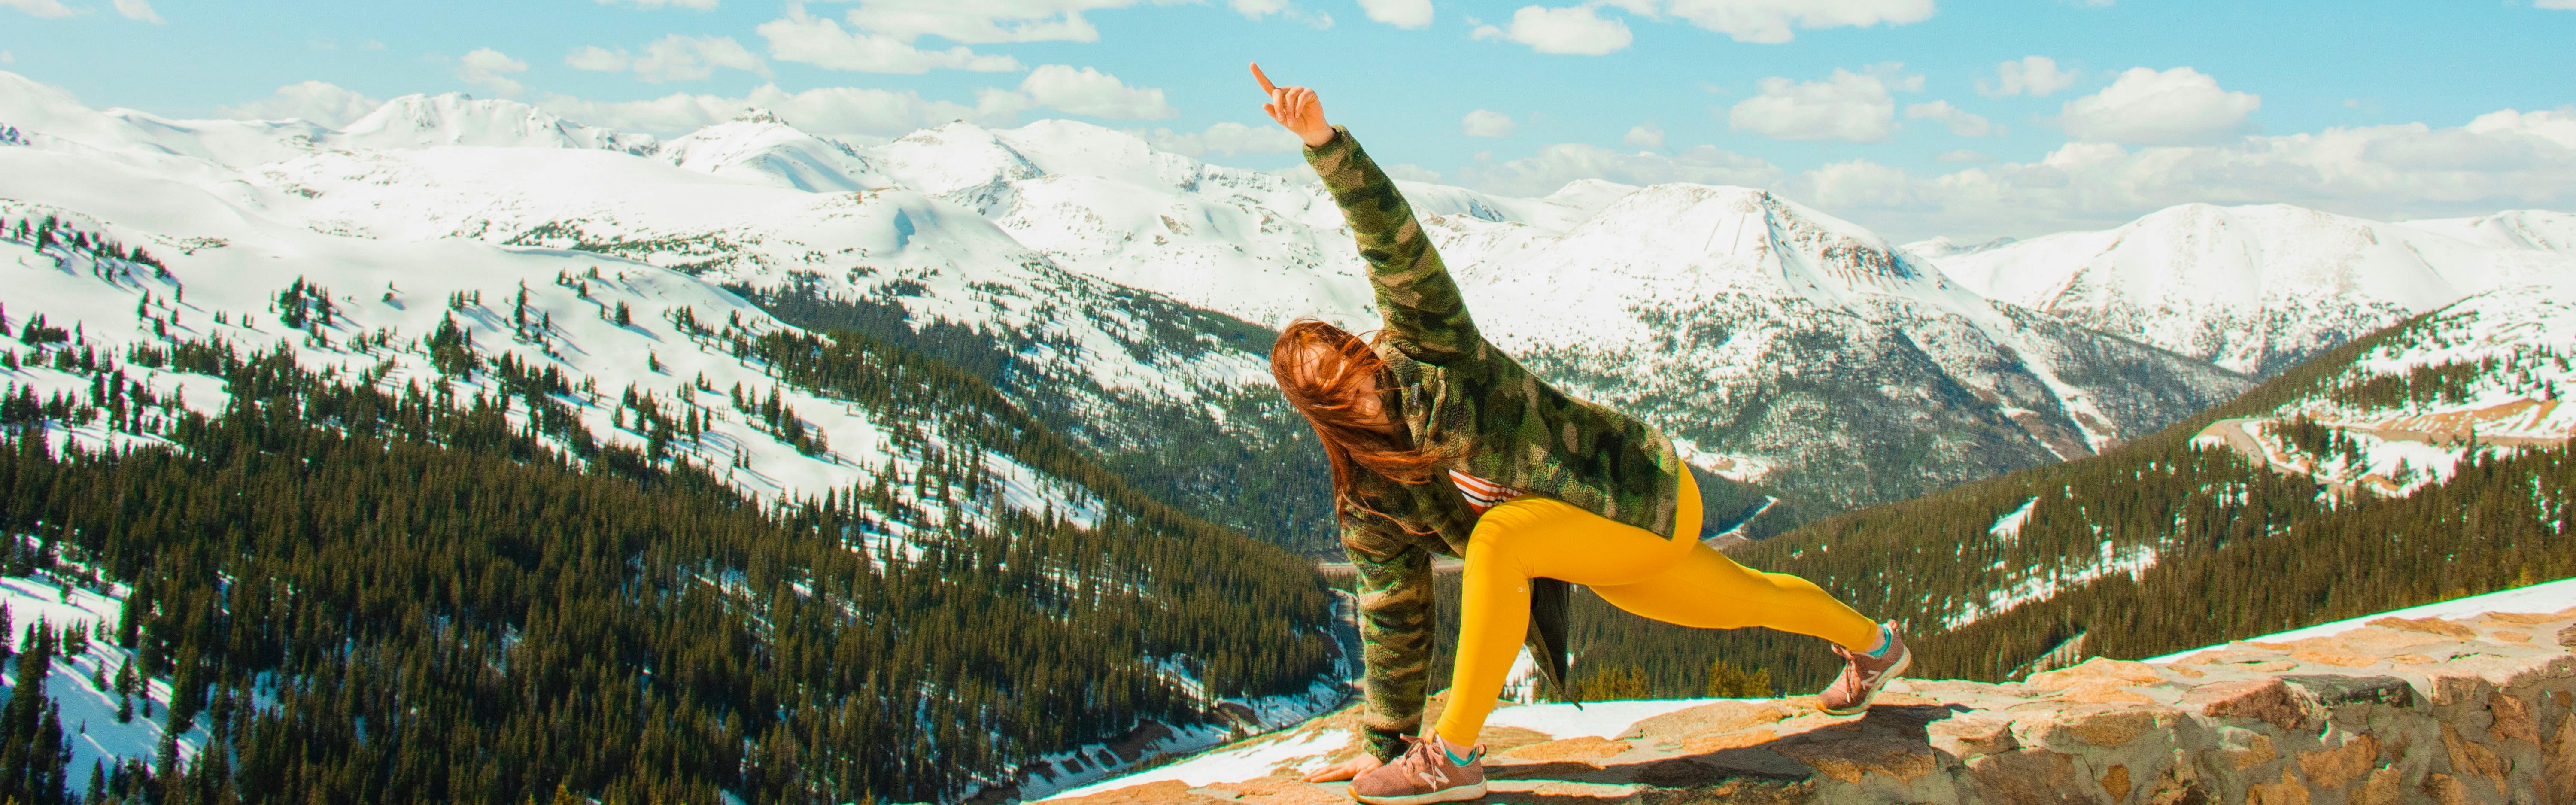 Woman does yoga on the top of a peak. There are snowy mountains in the background.